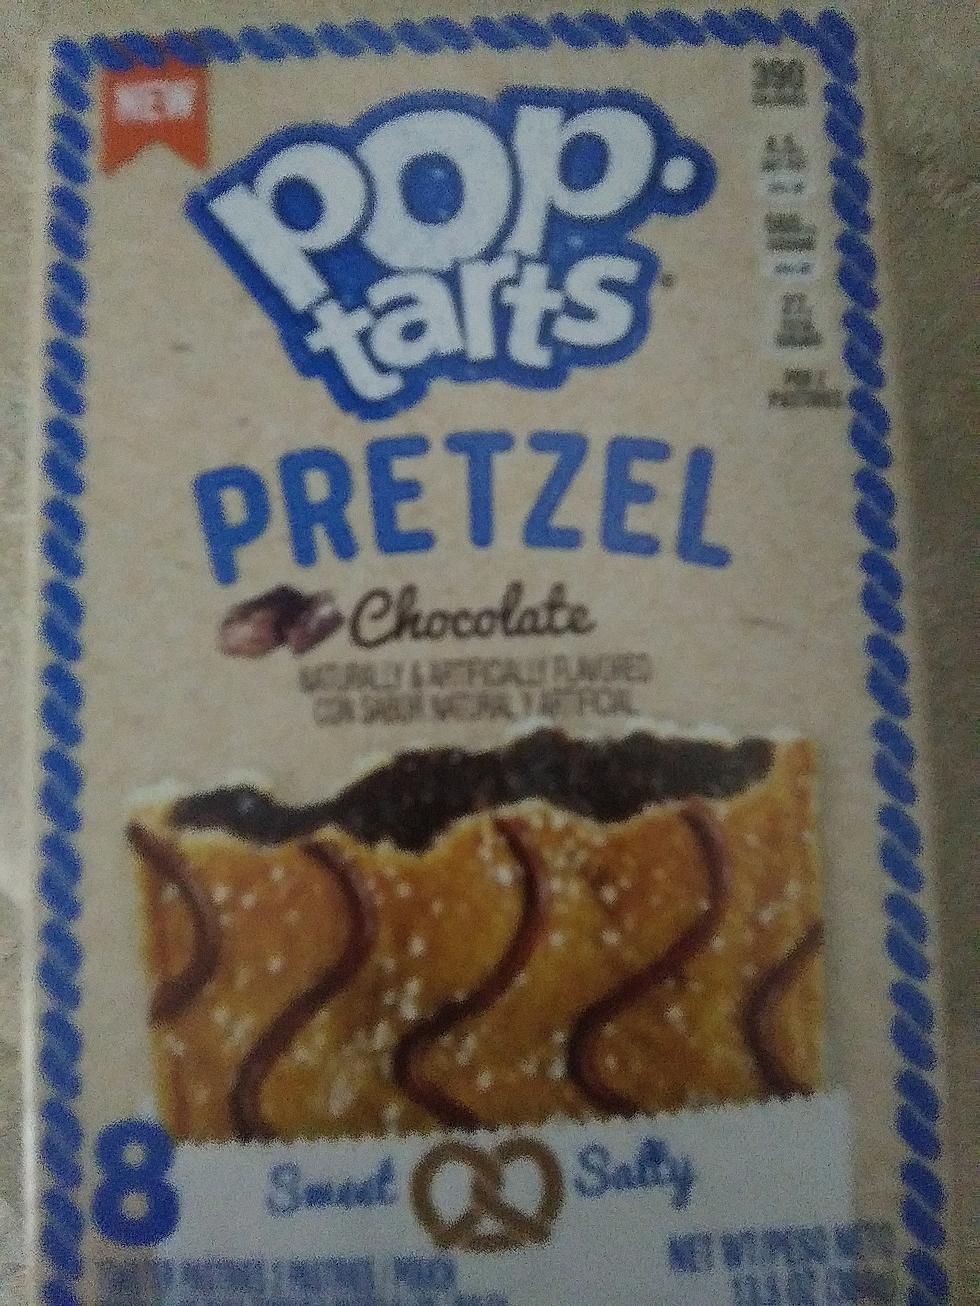 I Tried Salted Pretzel Chocolate Pop Tarts And Had&#8230;.. Some Thoughts